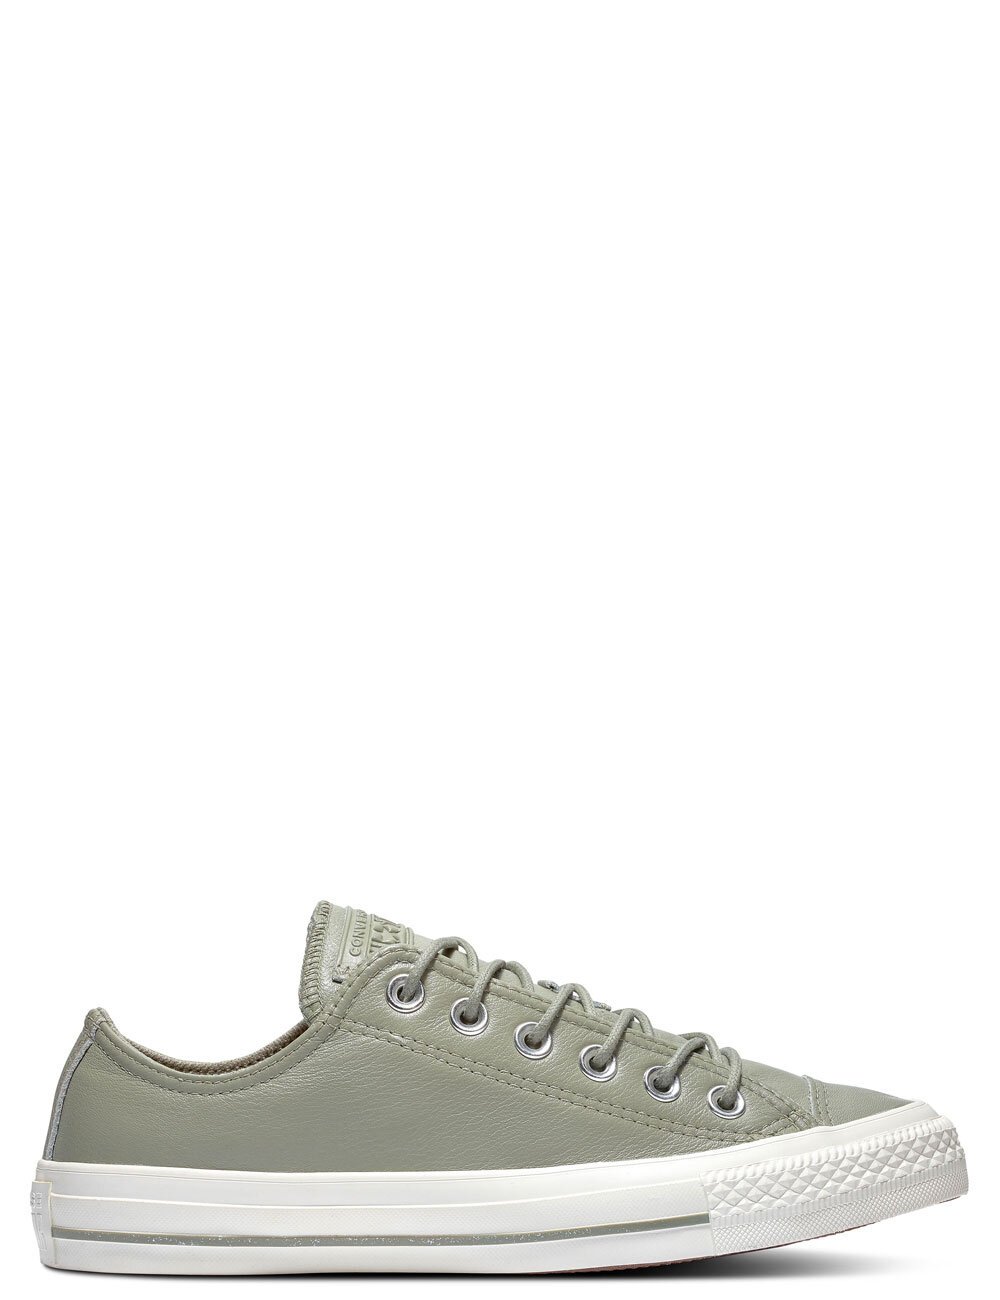 converse 7s leather white